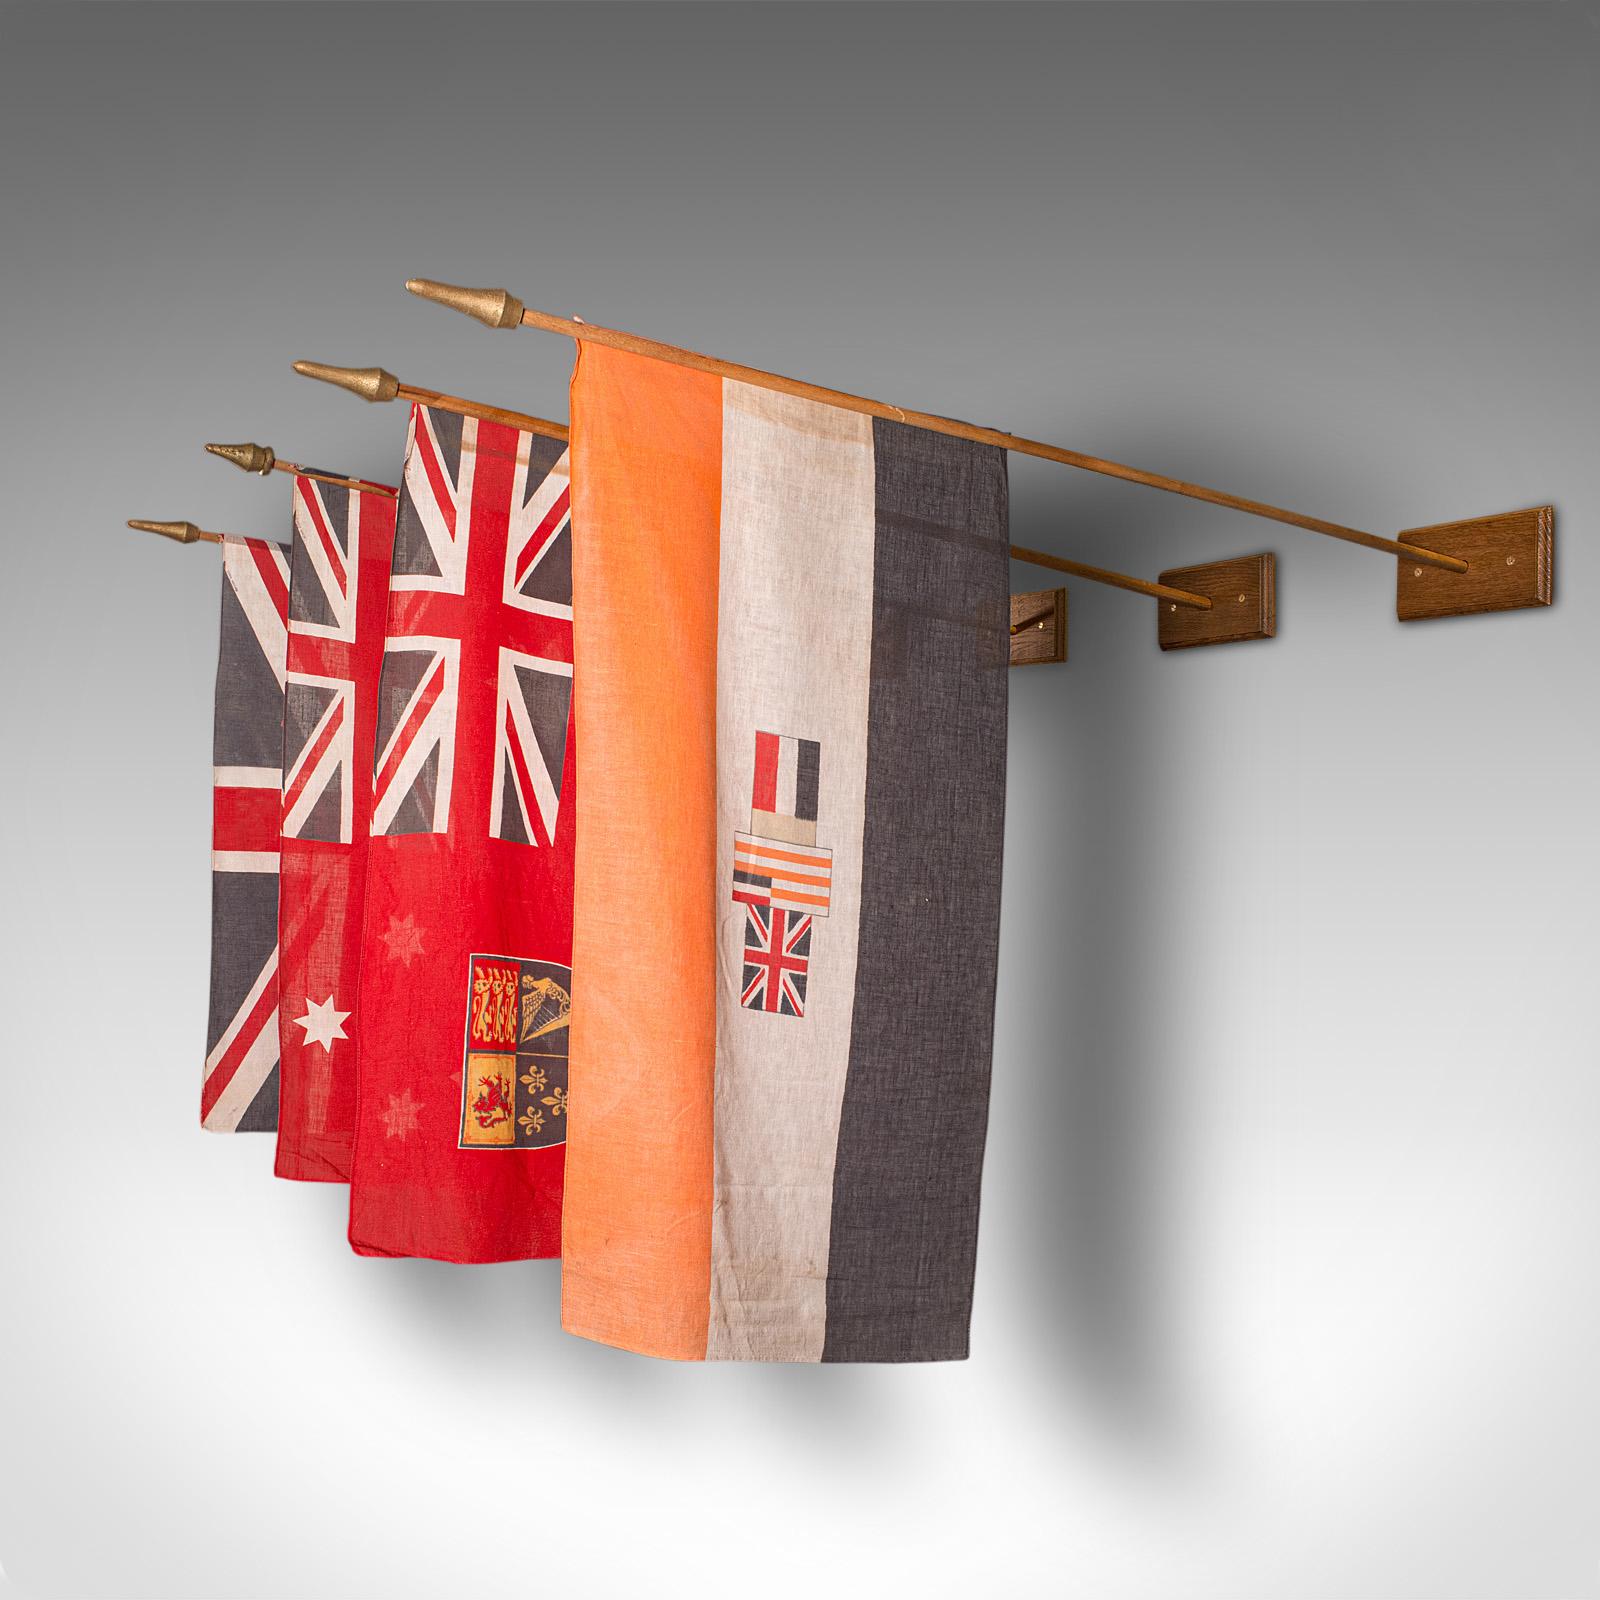 This is a set of 4 vintage Empirical embassy flags. A Commonwealth, cotton official flag upon an oak mount, dating to the mid 20th century and later.

Comprising the classic United Kingdom Union Jack, the Australian red ensign for Merchant Navy